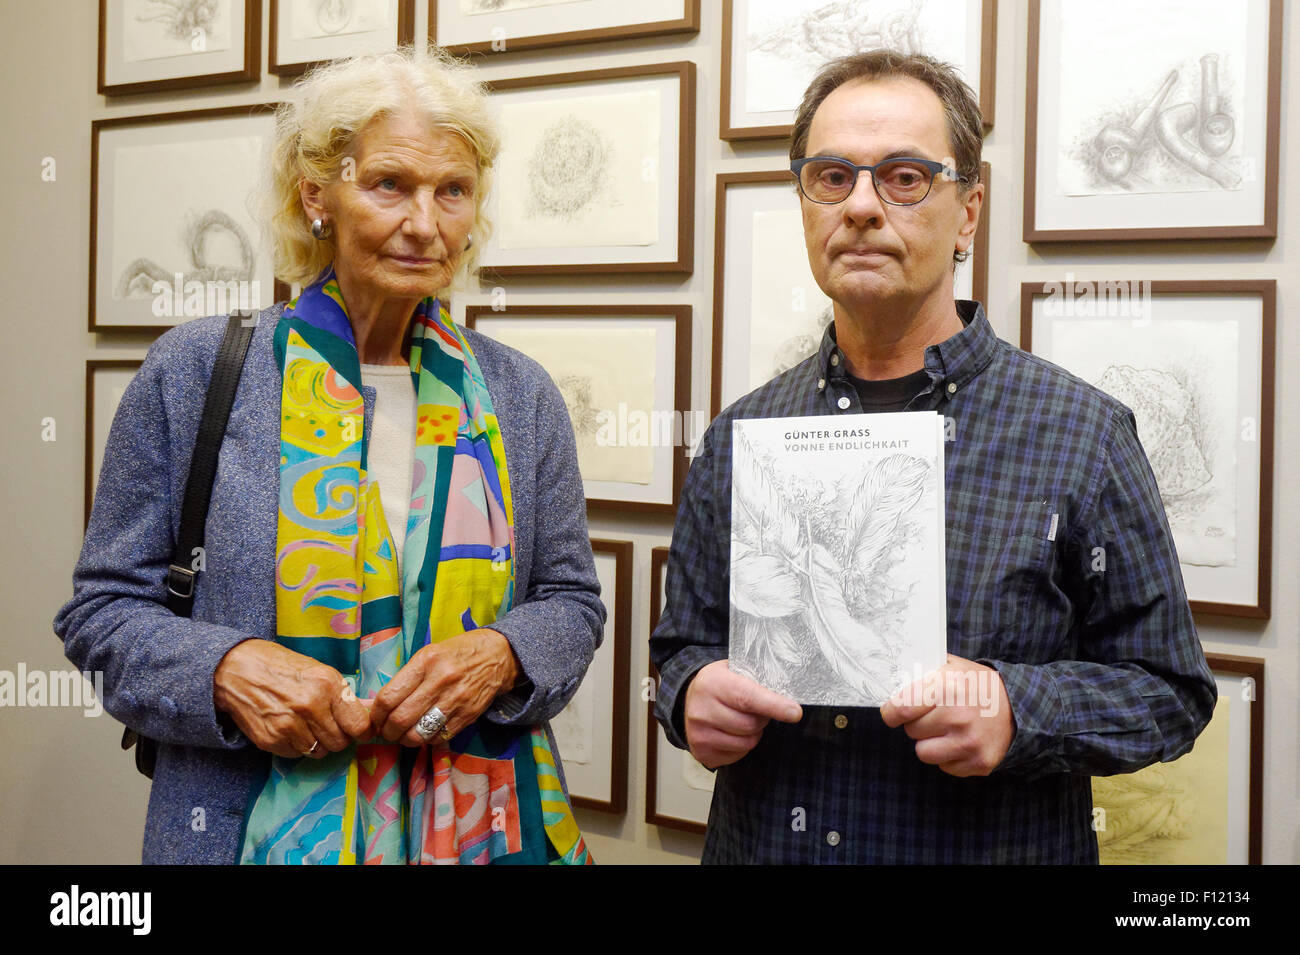 Goettingen, Germany. 25th Aug, 2015. Publisher Gerhard Steidl and Guenter Grass' widow Ute Grass, present "Vonne Endlichkait", the final novel by Guenter Grass, at the Guenter-Grass-Archiv in Goettingen, Germany, 25 August 2015. The book goes on sale on 28 August 2015. PHOTO: SWEN PFOERTNER/DPA/Alamy Live News Stock Photo